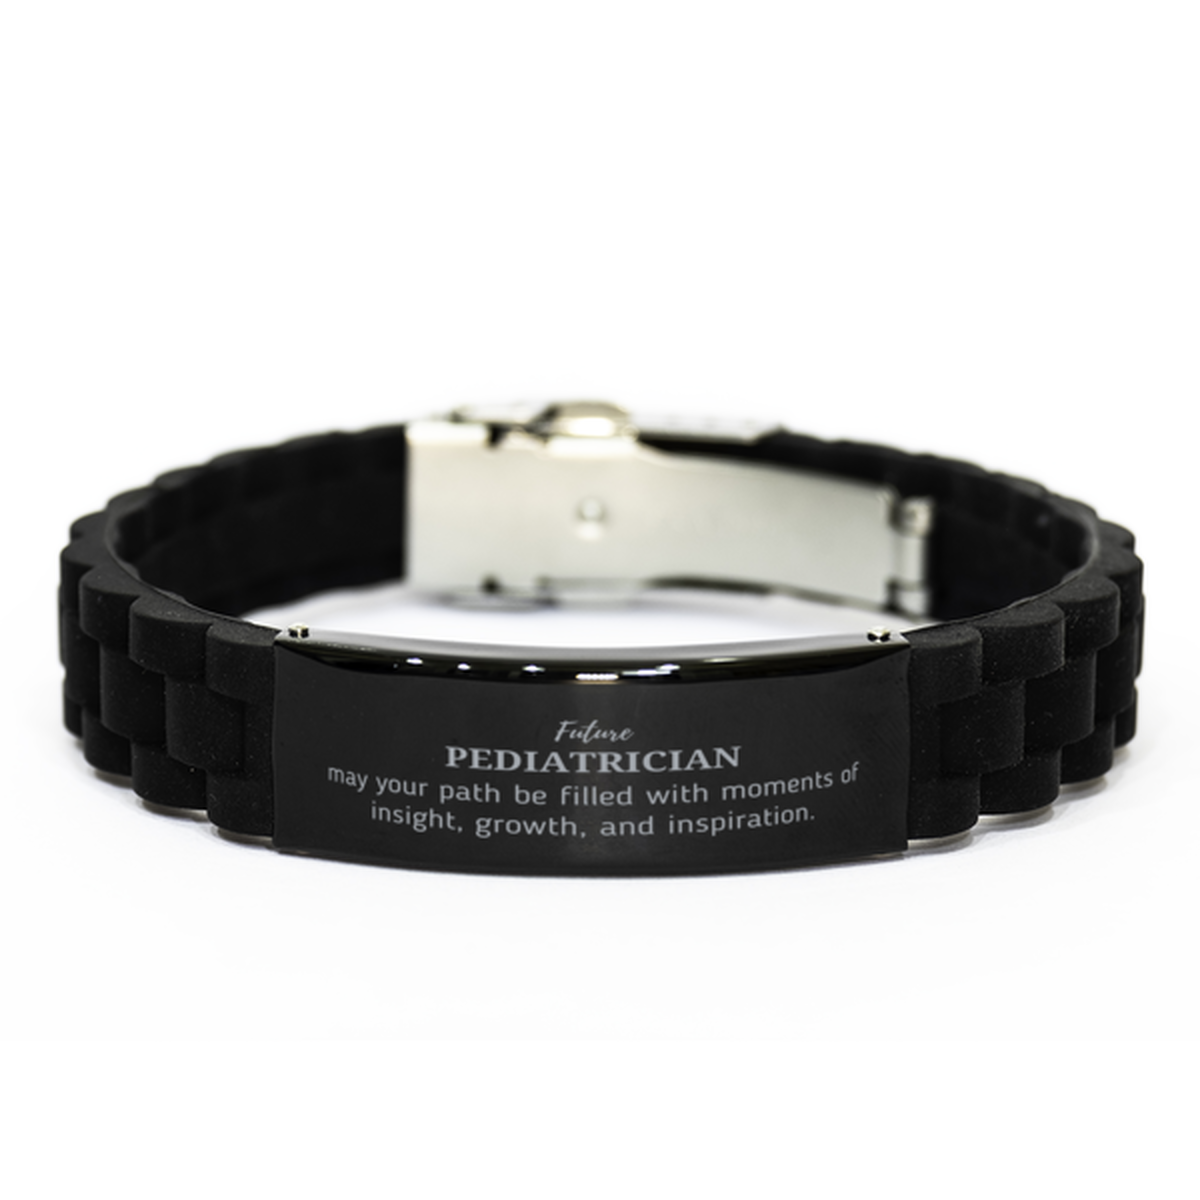 Future Pediatrician Gifts, May your path be filled with moments of insight, Graduation Gifts for New Pediatrician, Christmas Unique Black Glidelock Clasp Bracelet For Men, Women, Friends